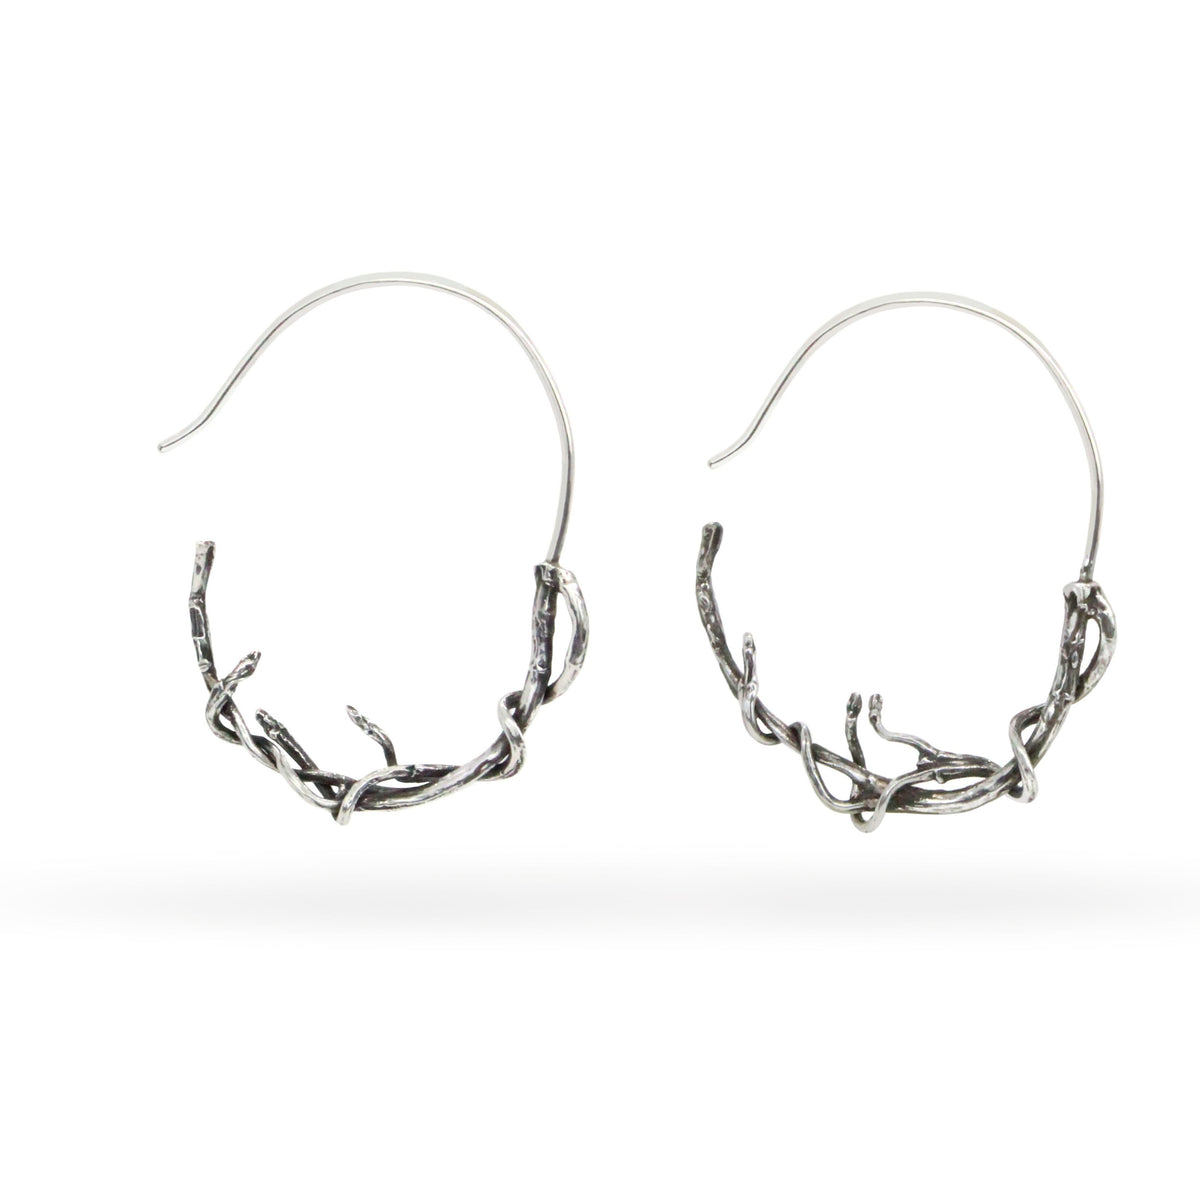 Maleficent Hoops - Susan Rodgers Designs